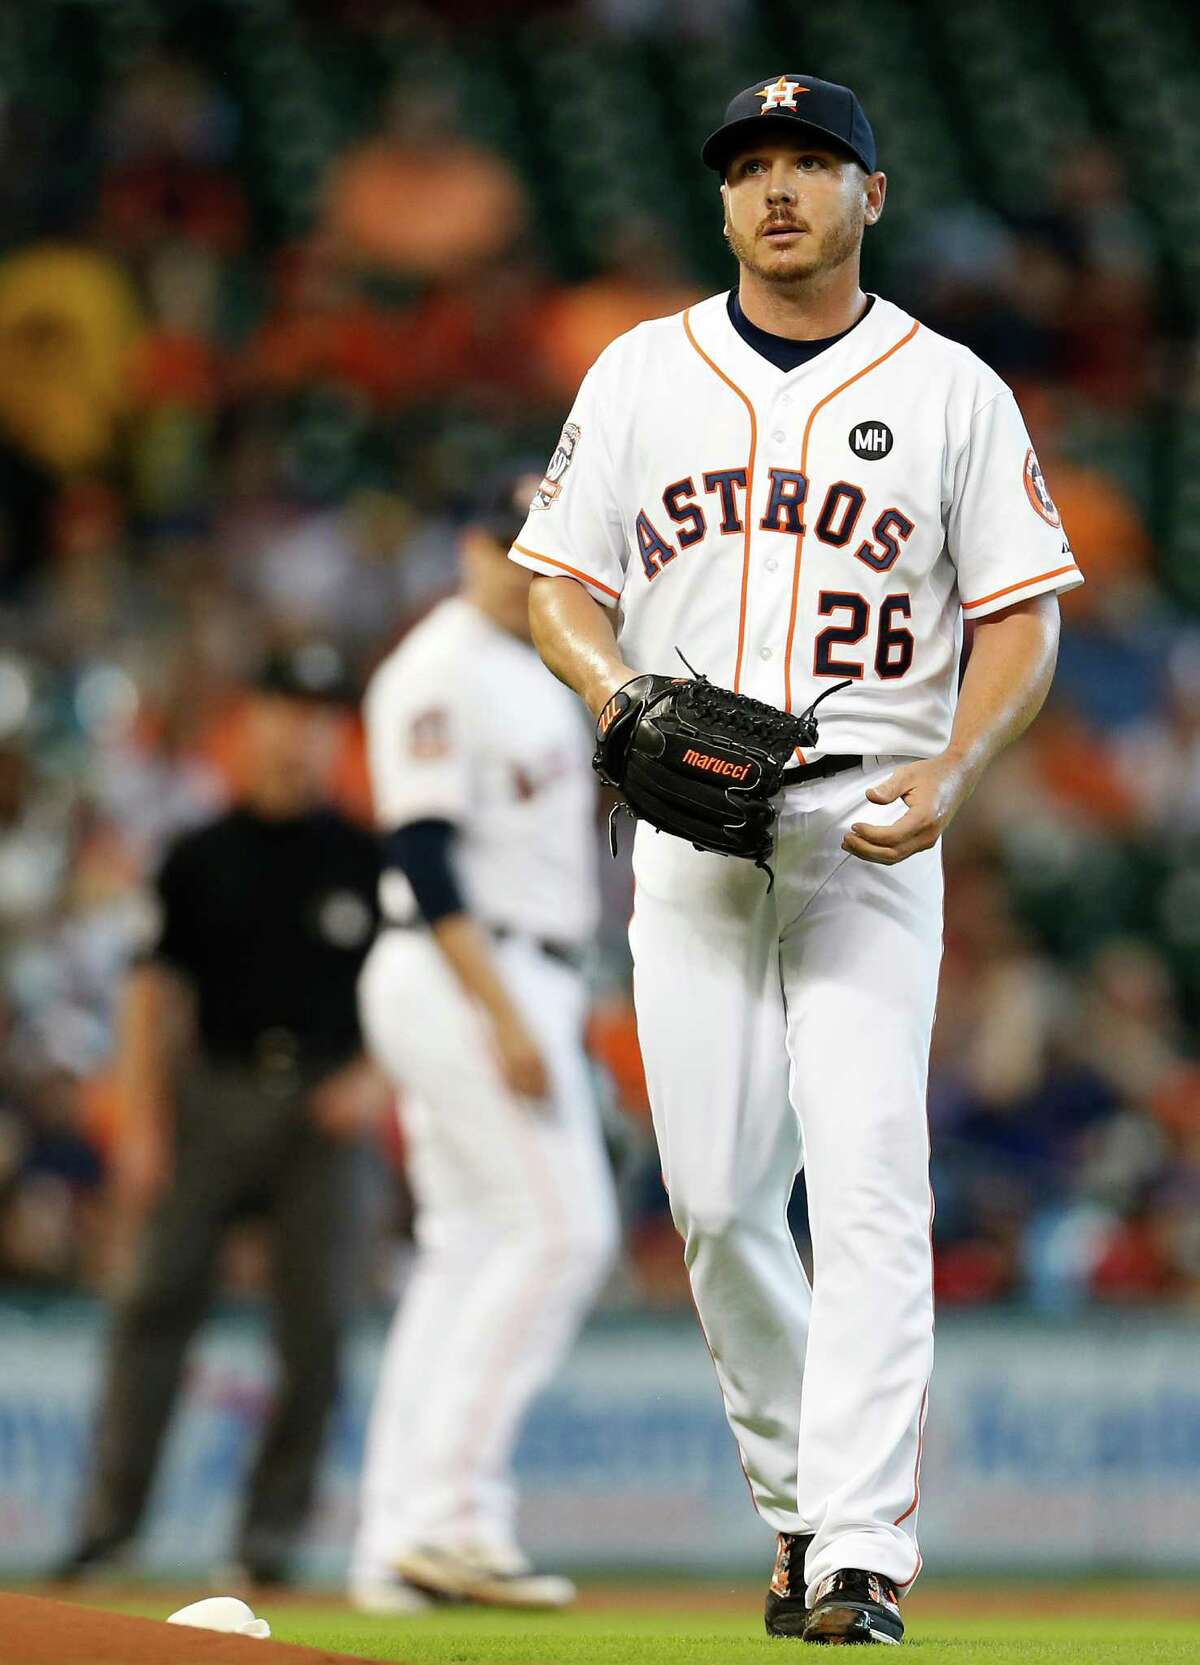 Houston Astros starting pitcher Scott Kazmir (26) between pitches during the first inning of an MLB baseball game at Minute Maid Park on Saturday, Sept. 19, 2015. ( Karen Warren / Houston Chronicle )